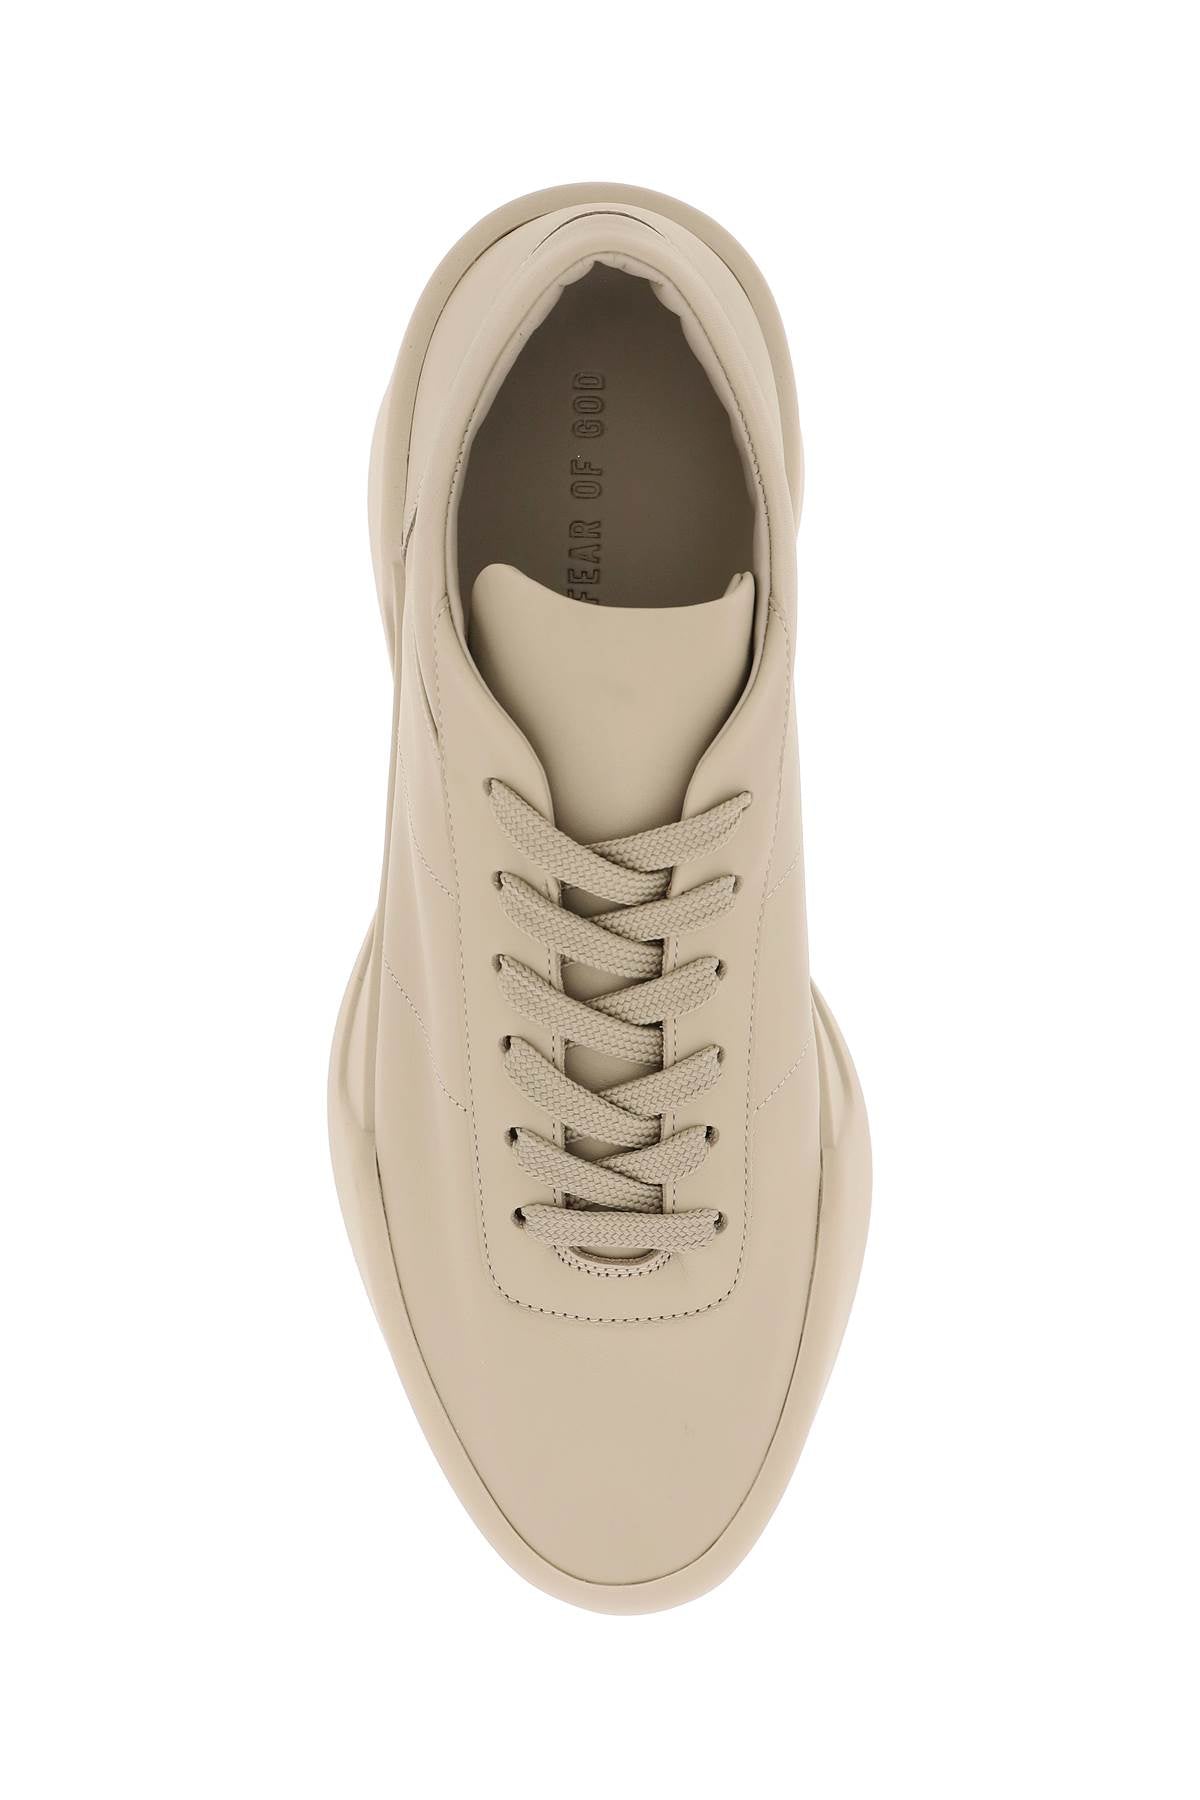 Fear of god low aerobic sneakers-1